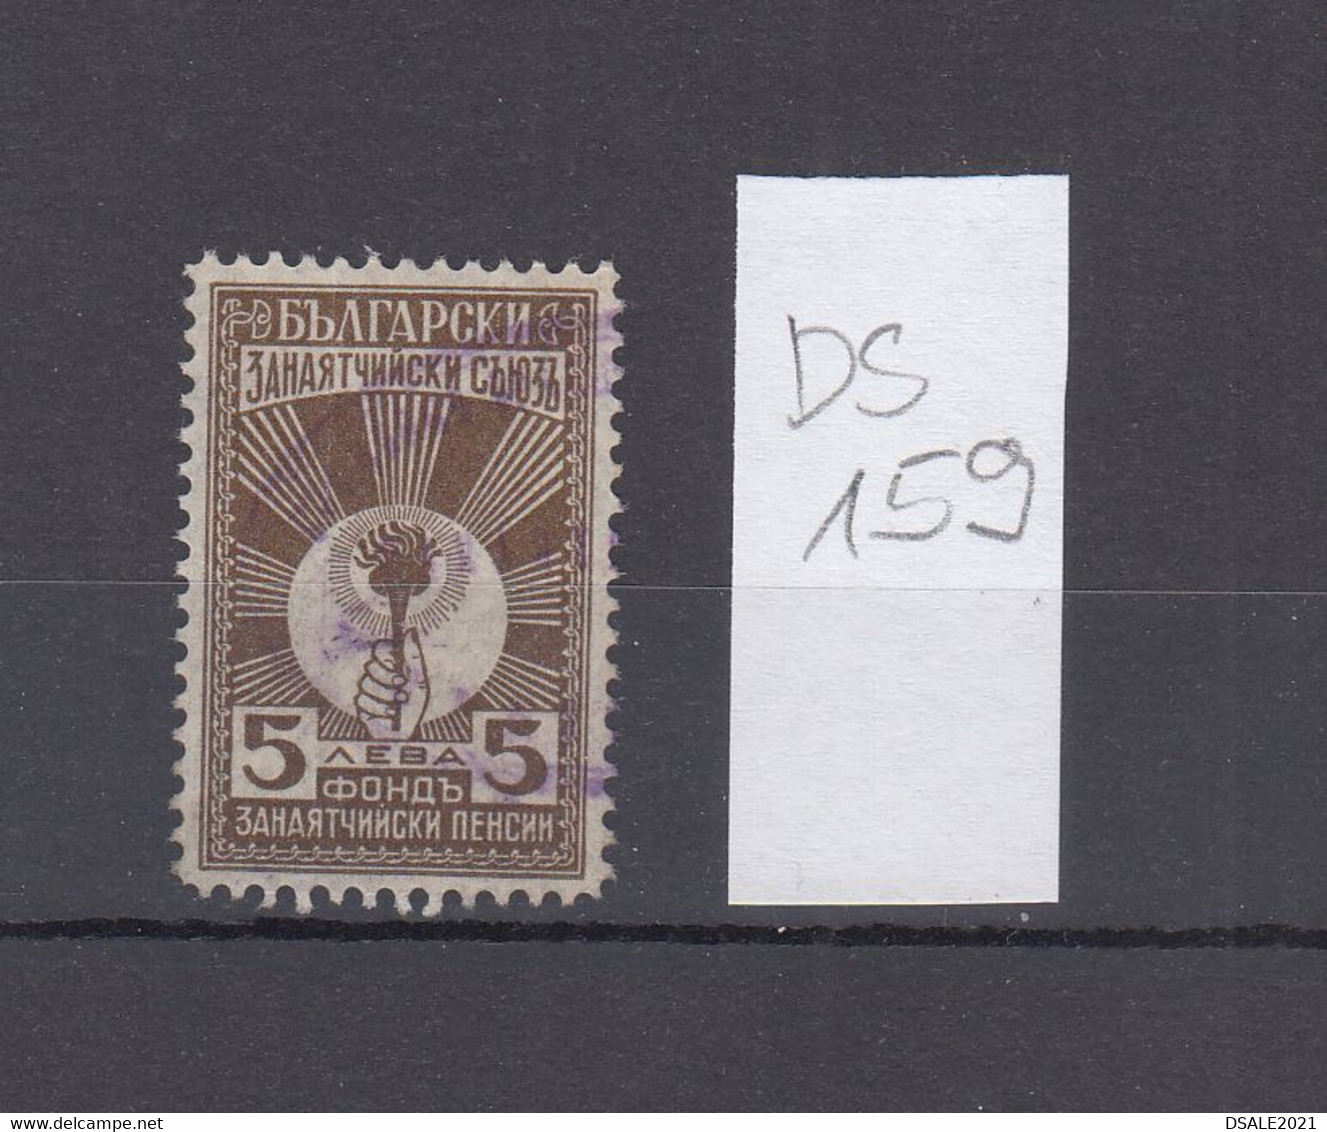 Bulgaria Bulgarie Bulgarije 1930s Craftsman Society 5Lv. Pension Fund Fiscal Revenue Stamp Bulgarian Revenues (ds159) - Official Stamps